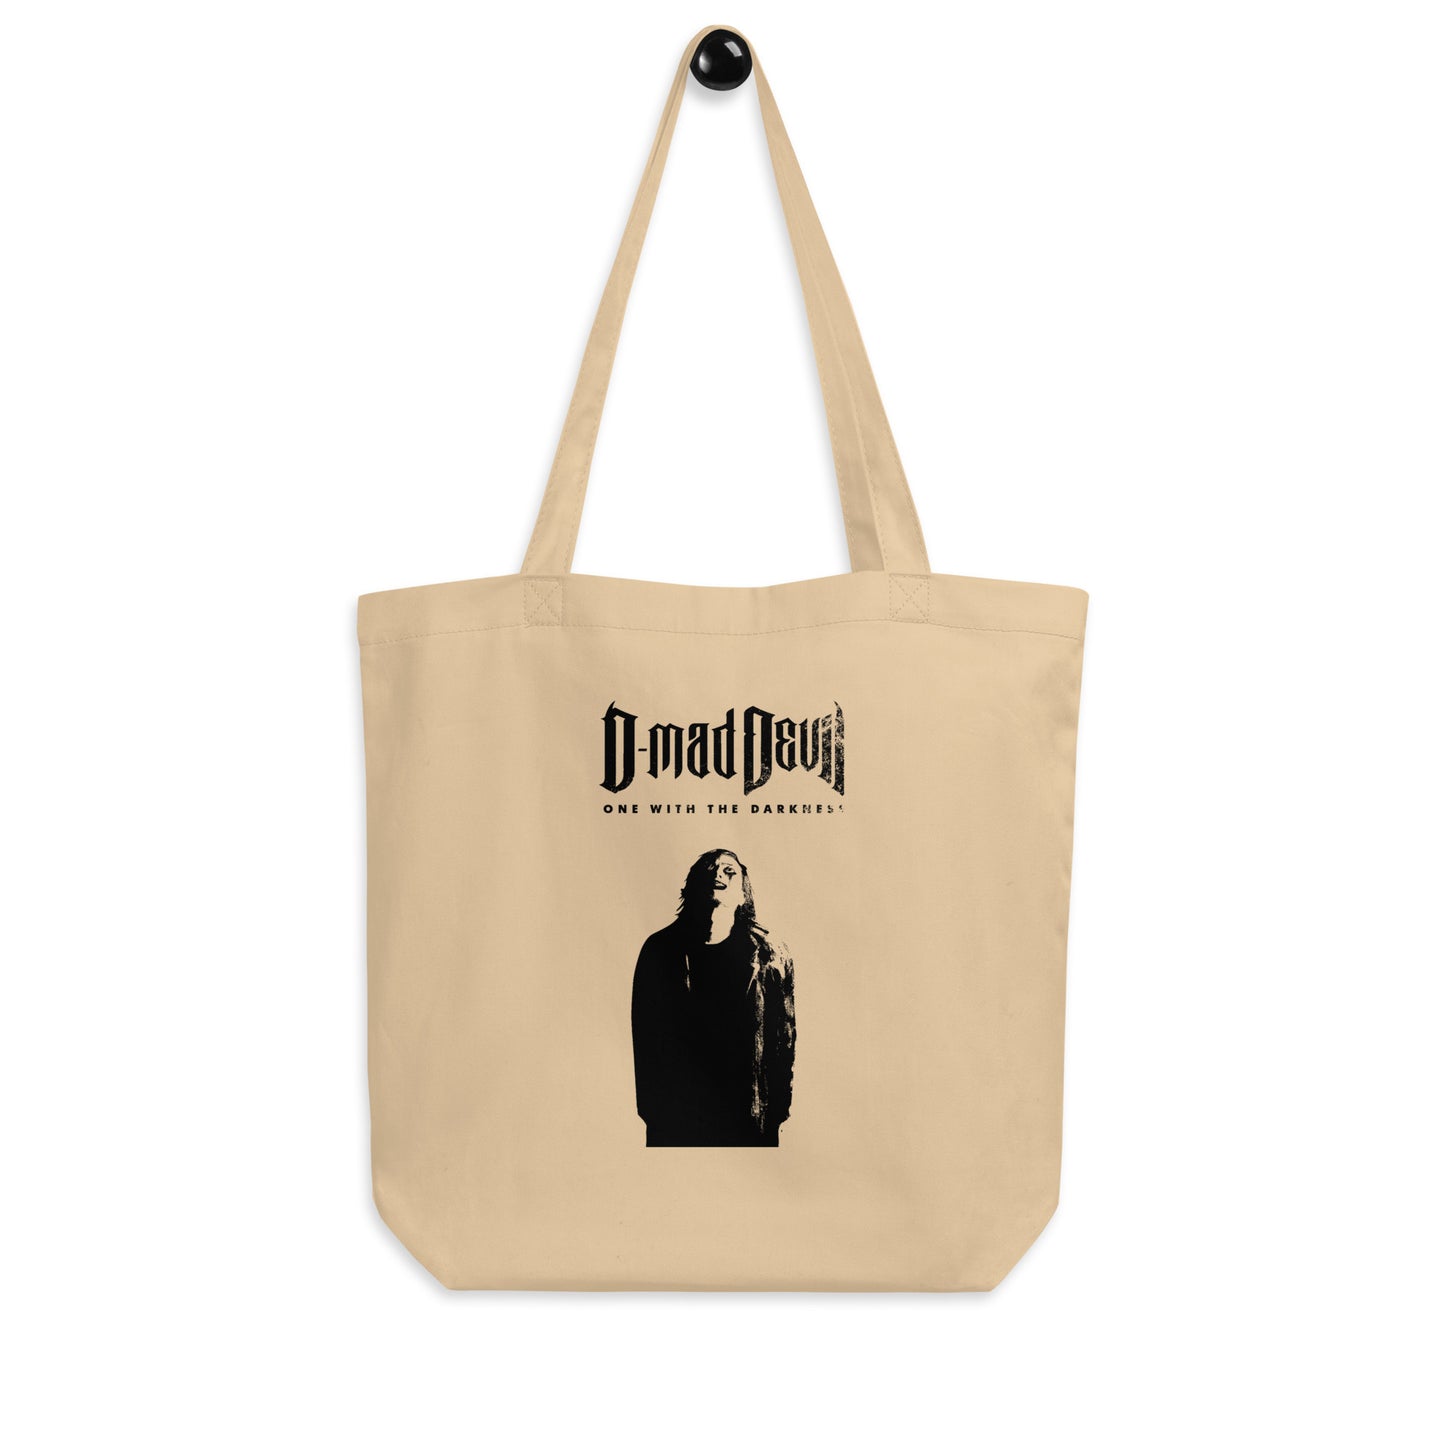 One With the Darkness Eco Tote Bag (Oyster)